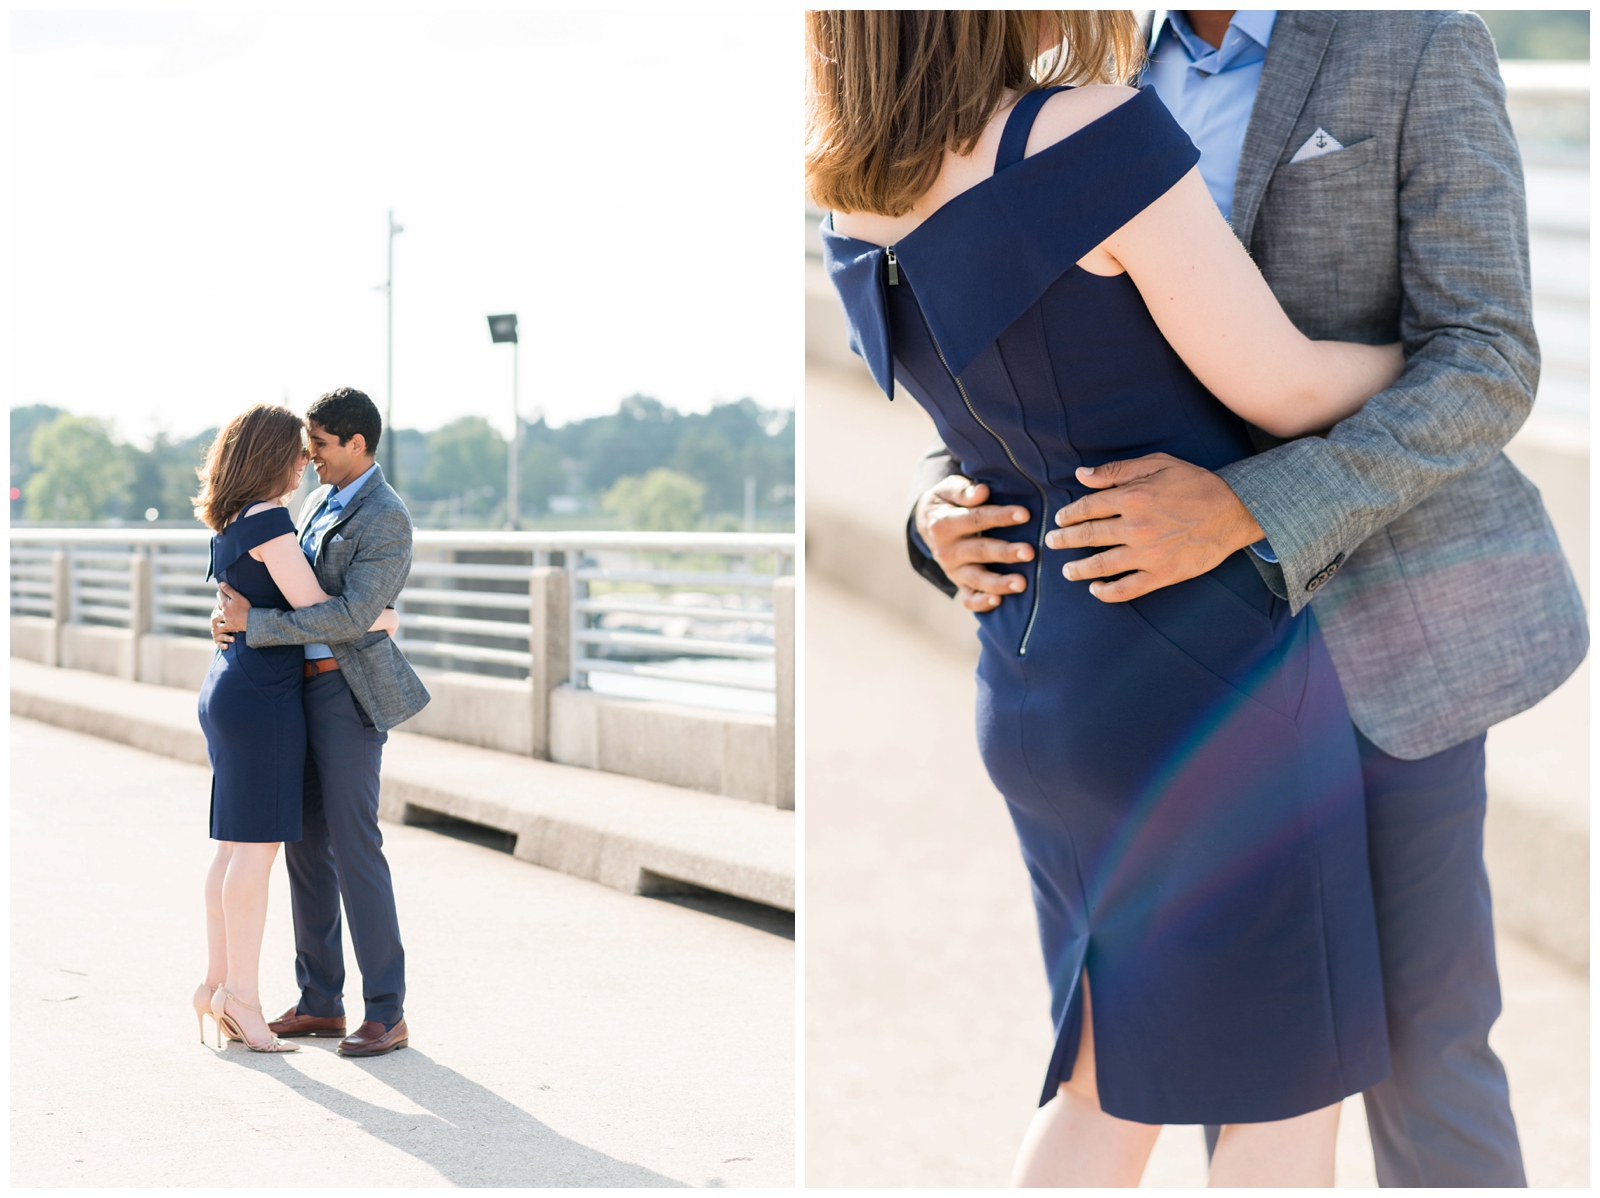 engaged couple embraces and dances on the bridge by Hoover Reservoir